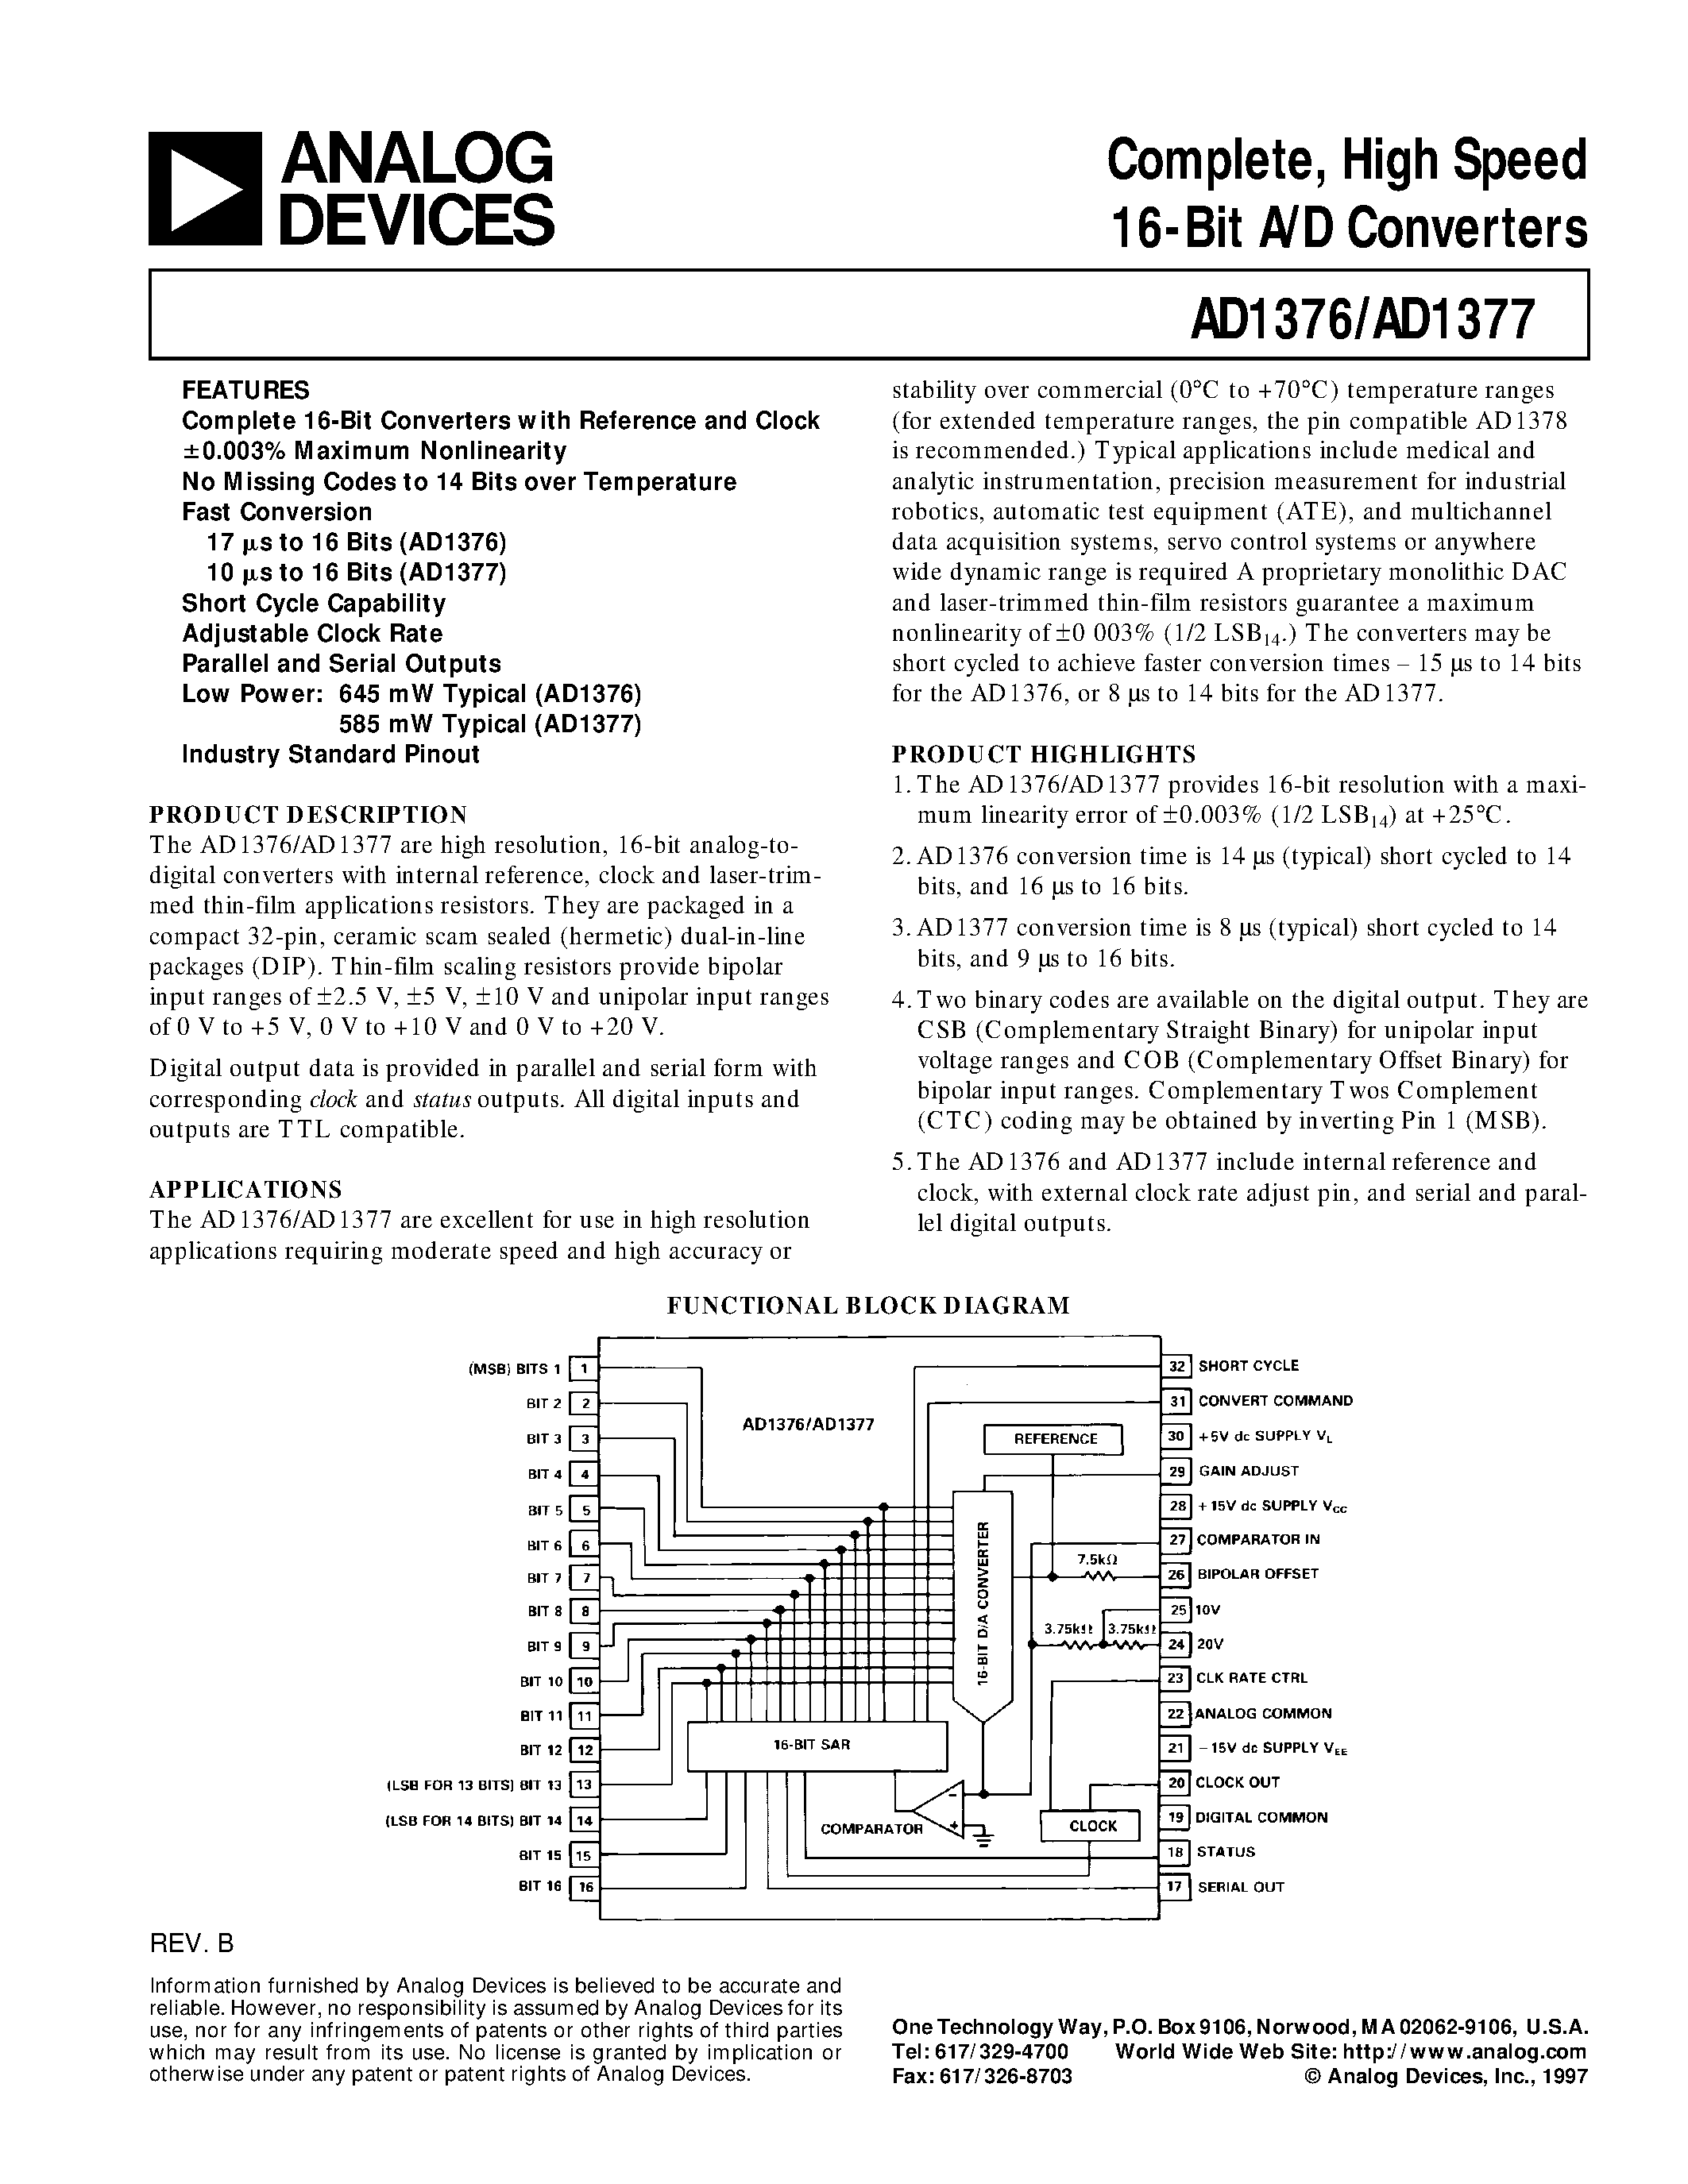 Datasheet AD1376KD - Complete/ High Speed 16-Bit A/D Converters page 1